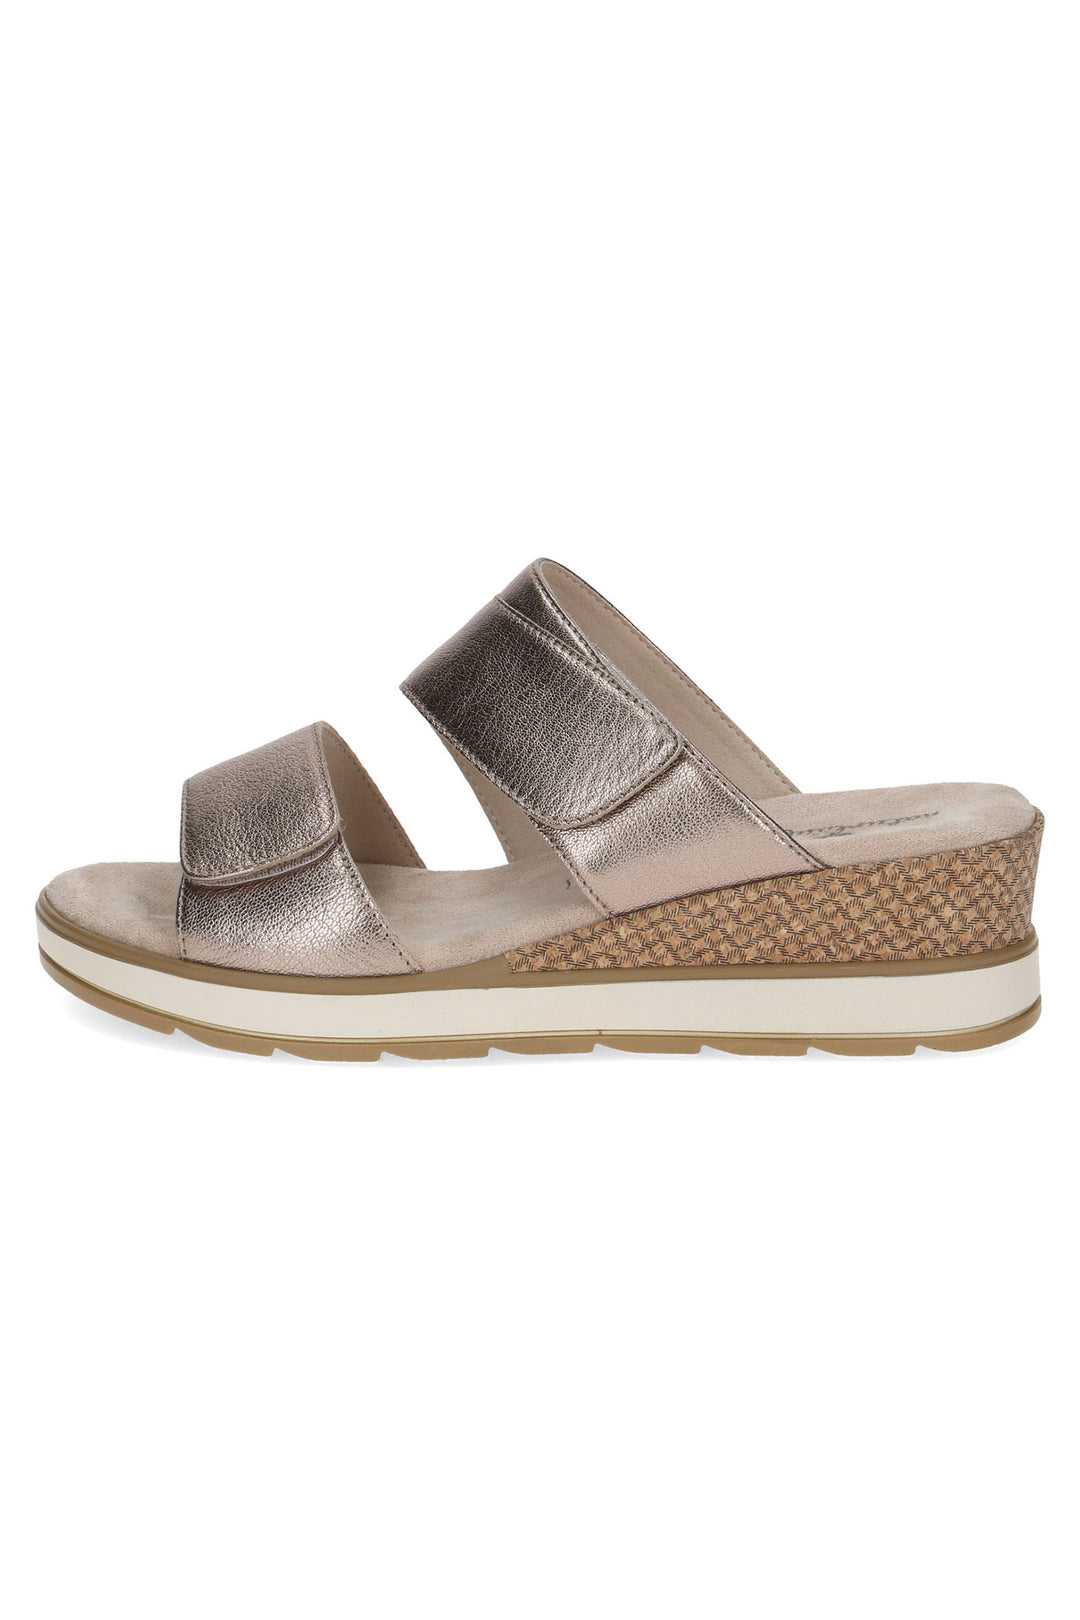 Caprice 9-27250-42 341 Taupe Metallic Memotion Wedge Sandals - Rouge Boutique Inverness